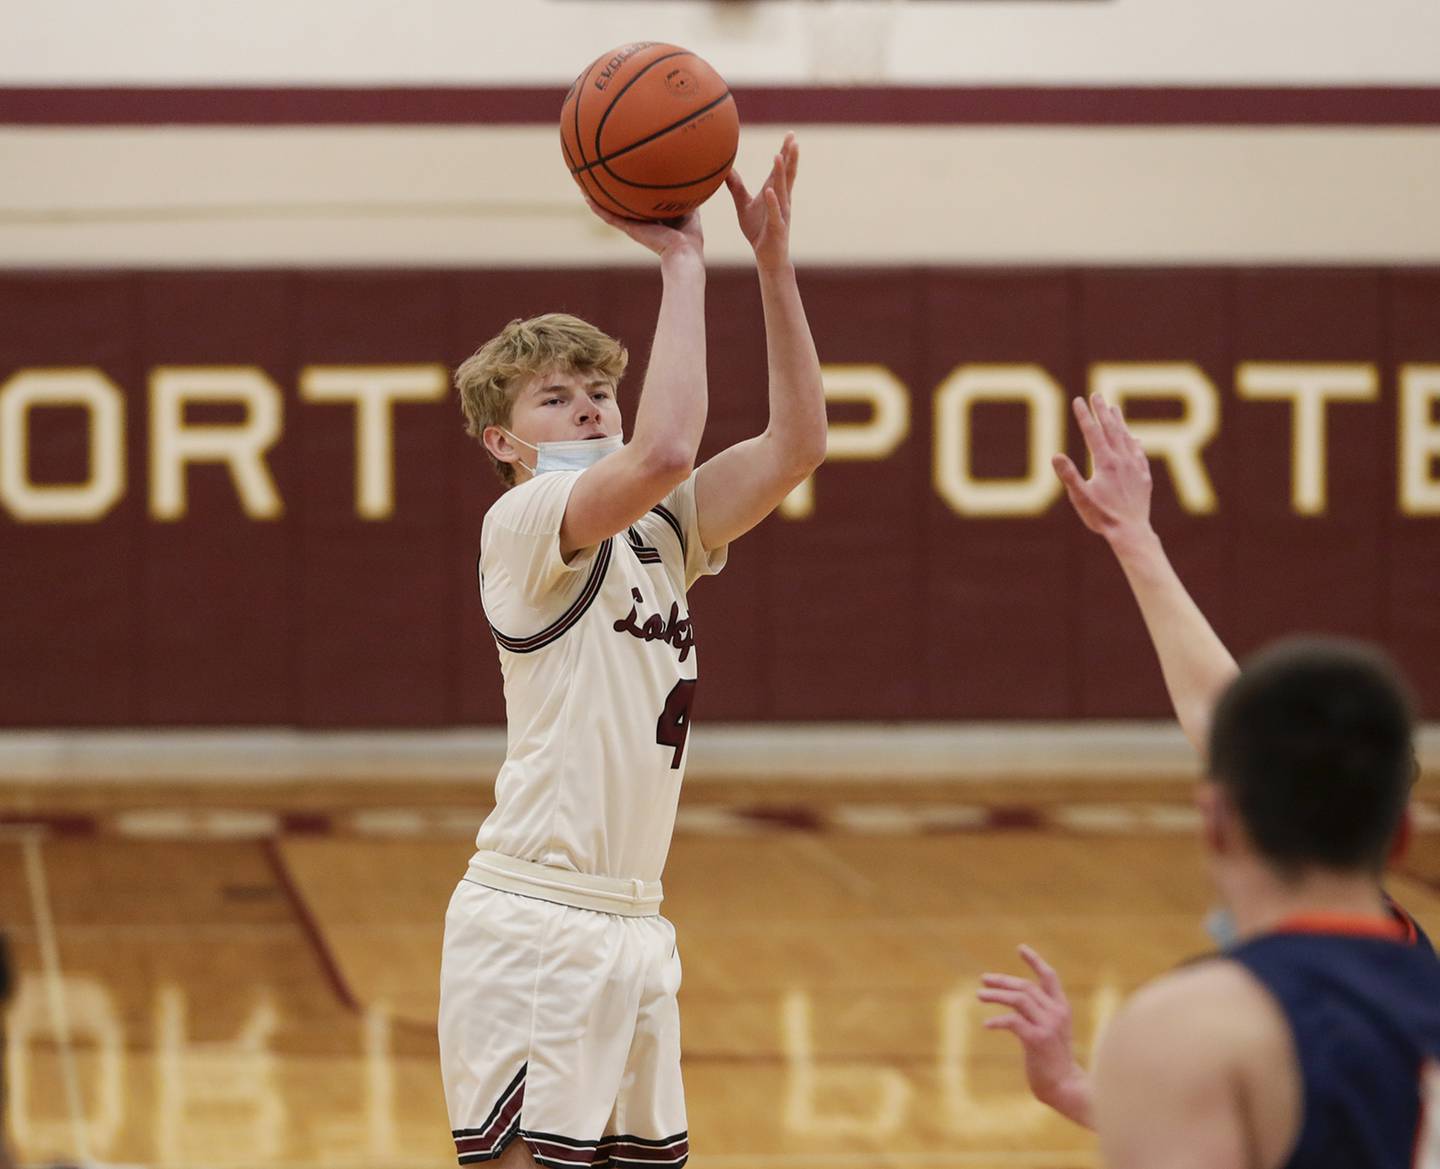 Lockport's Adam Labuda puts up a shot against Stagg during a SouthWest Suburban Conference crossover in Lockport on Friday, Jan. 7, 2022.